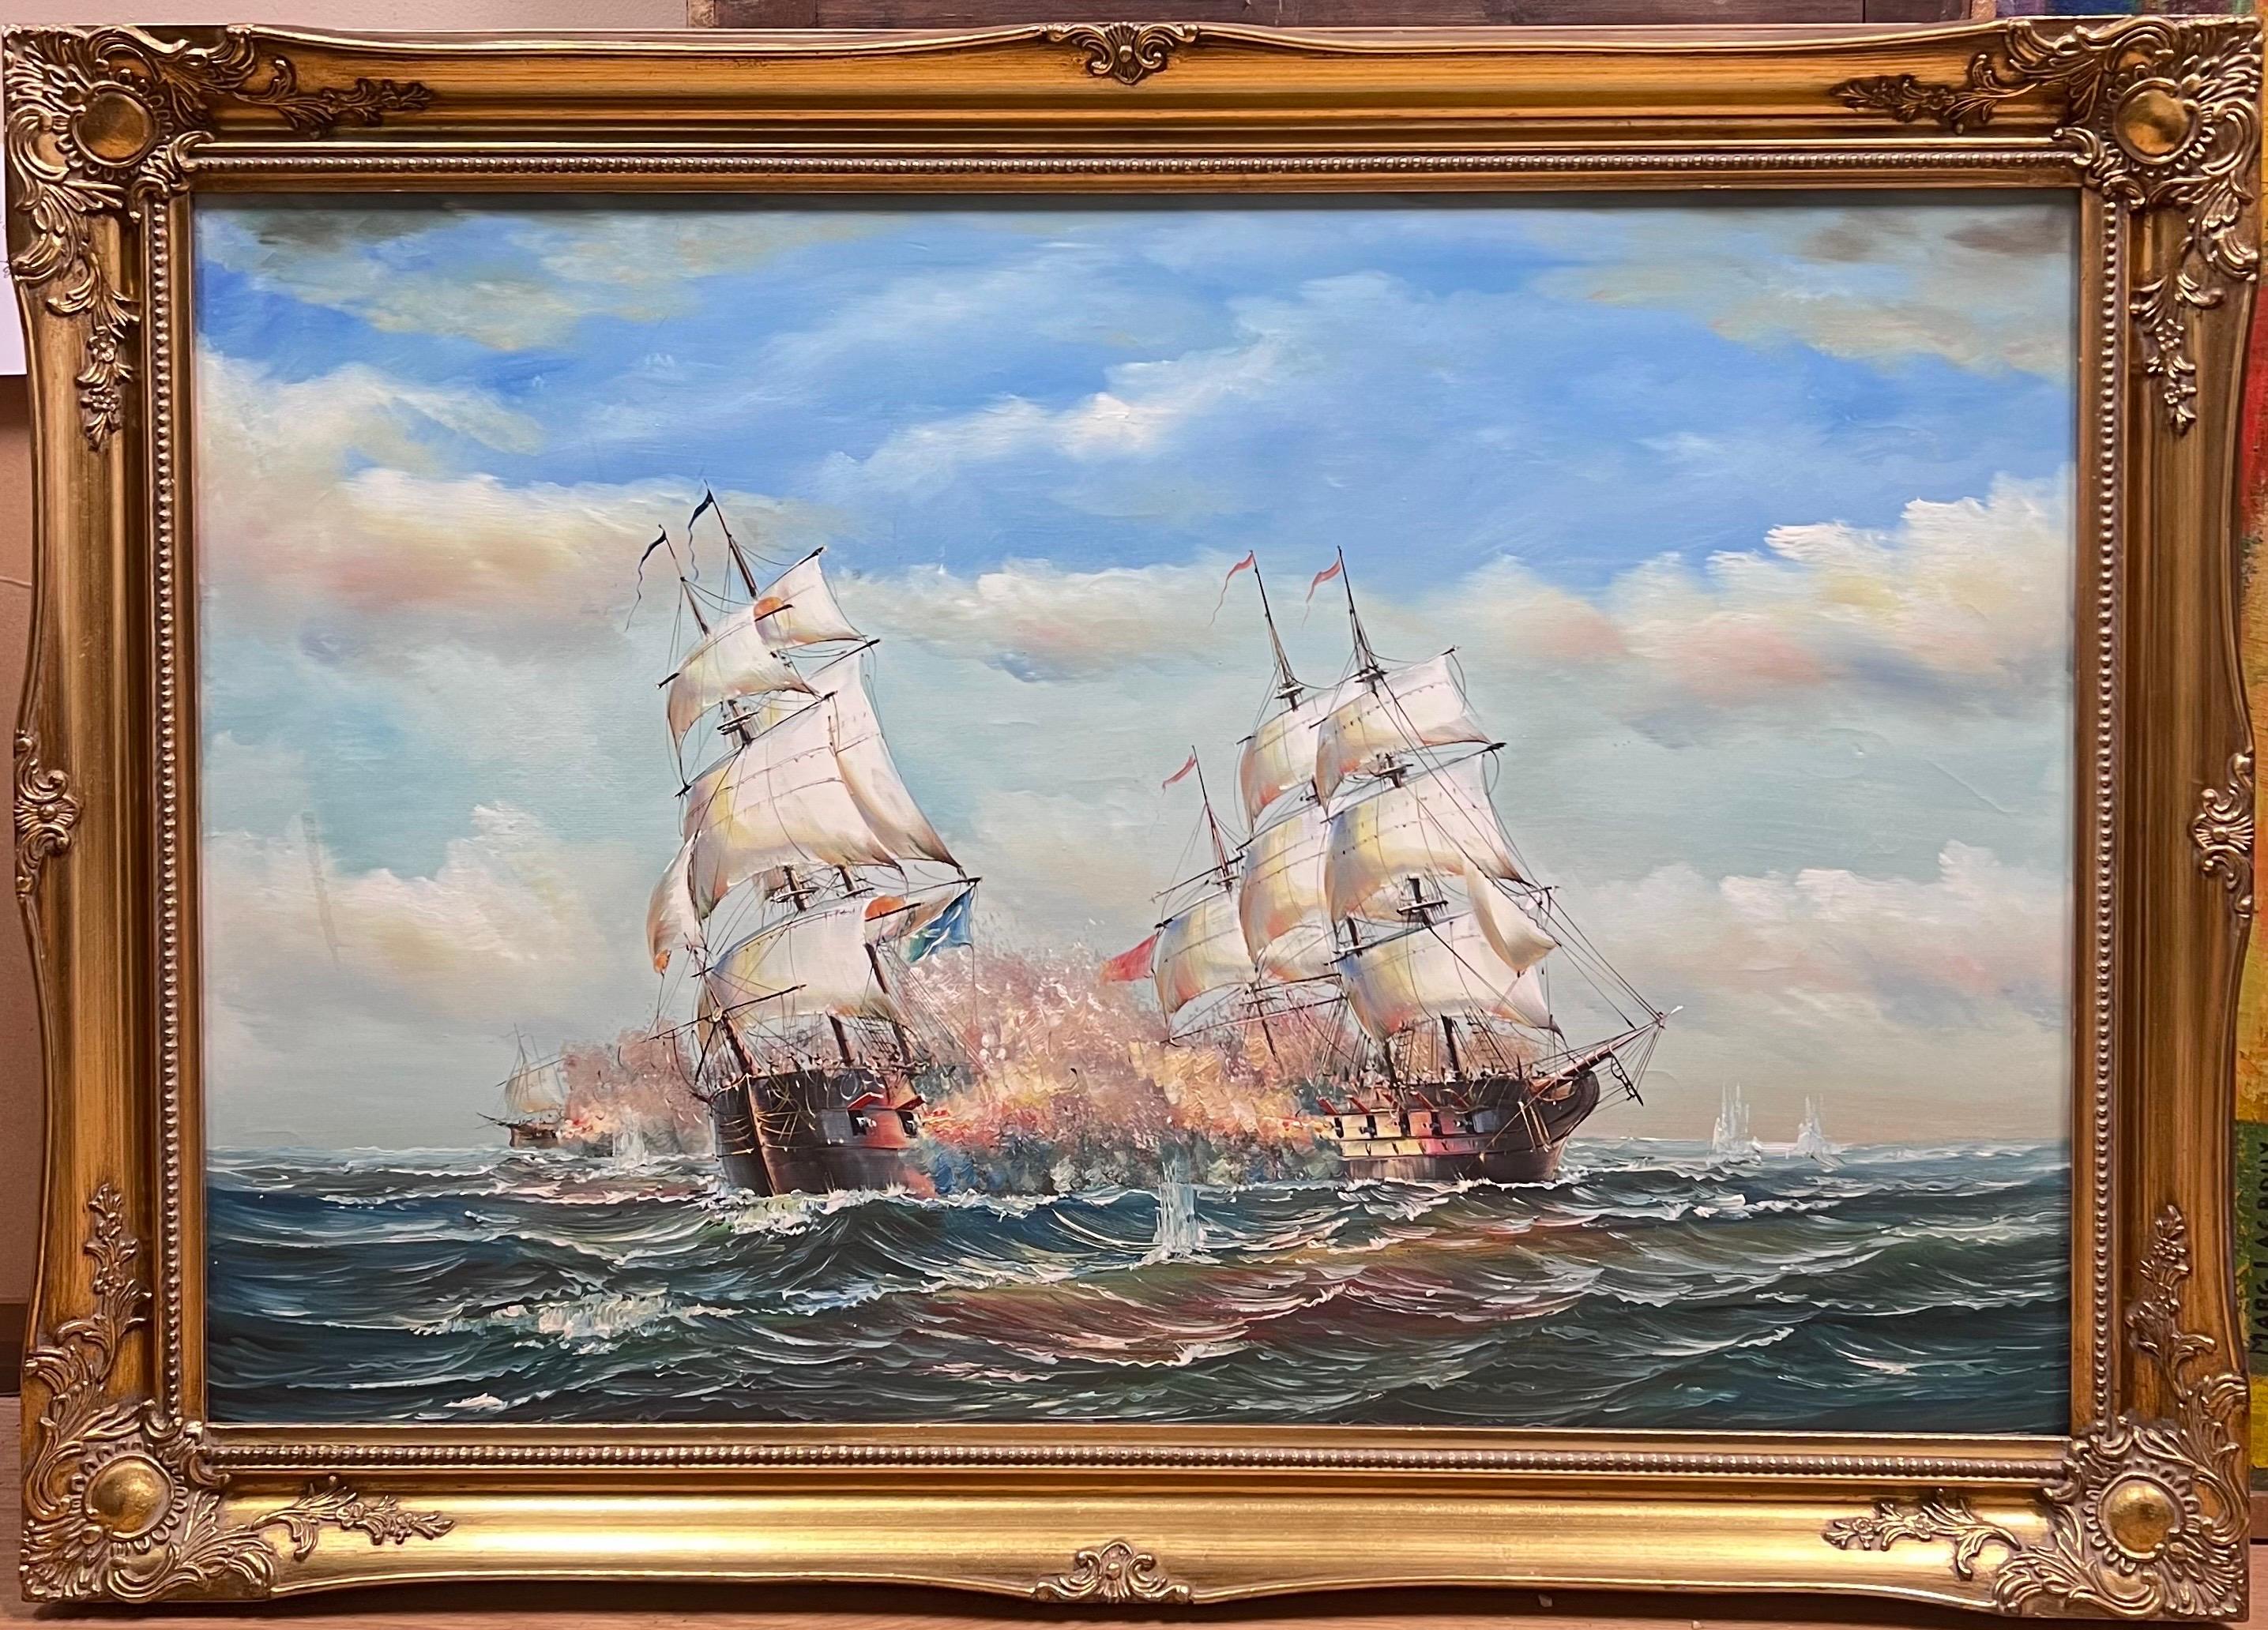 European Artist Figurative Painting - Very Large Marine Oil Painting Naval Battle Engagement at Sea Framed 